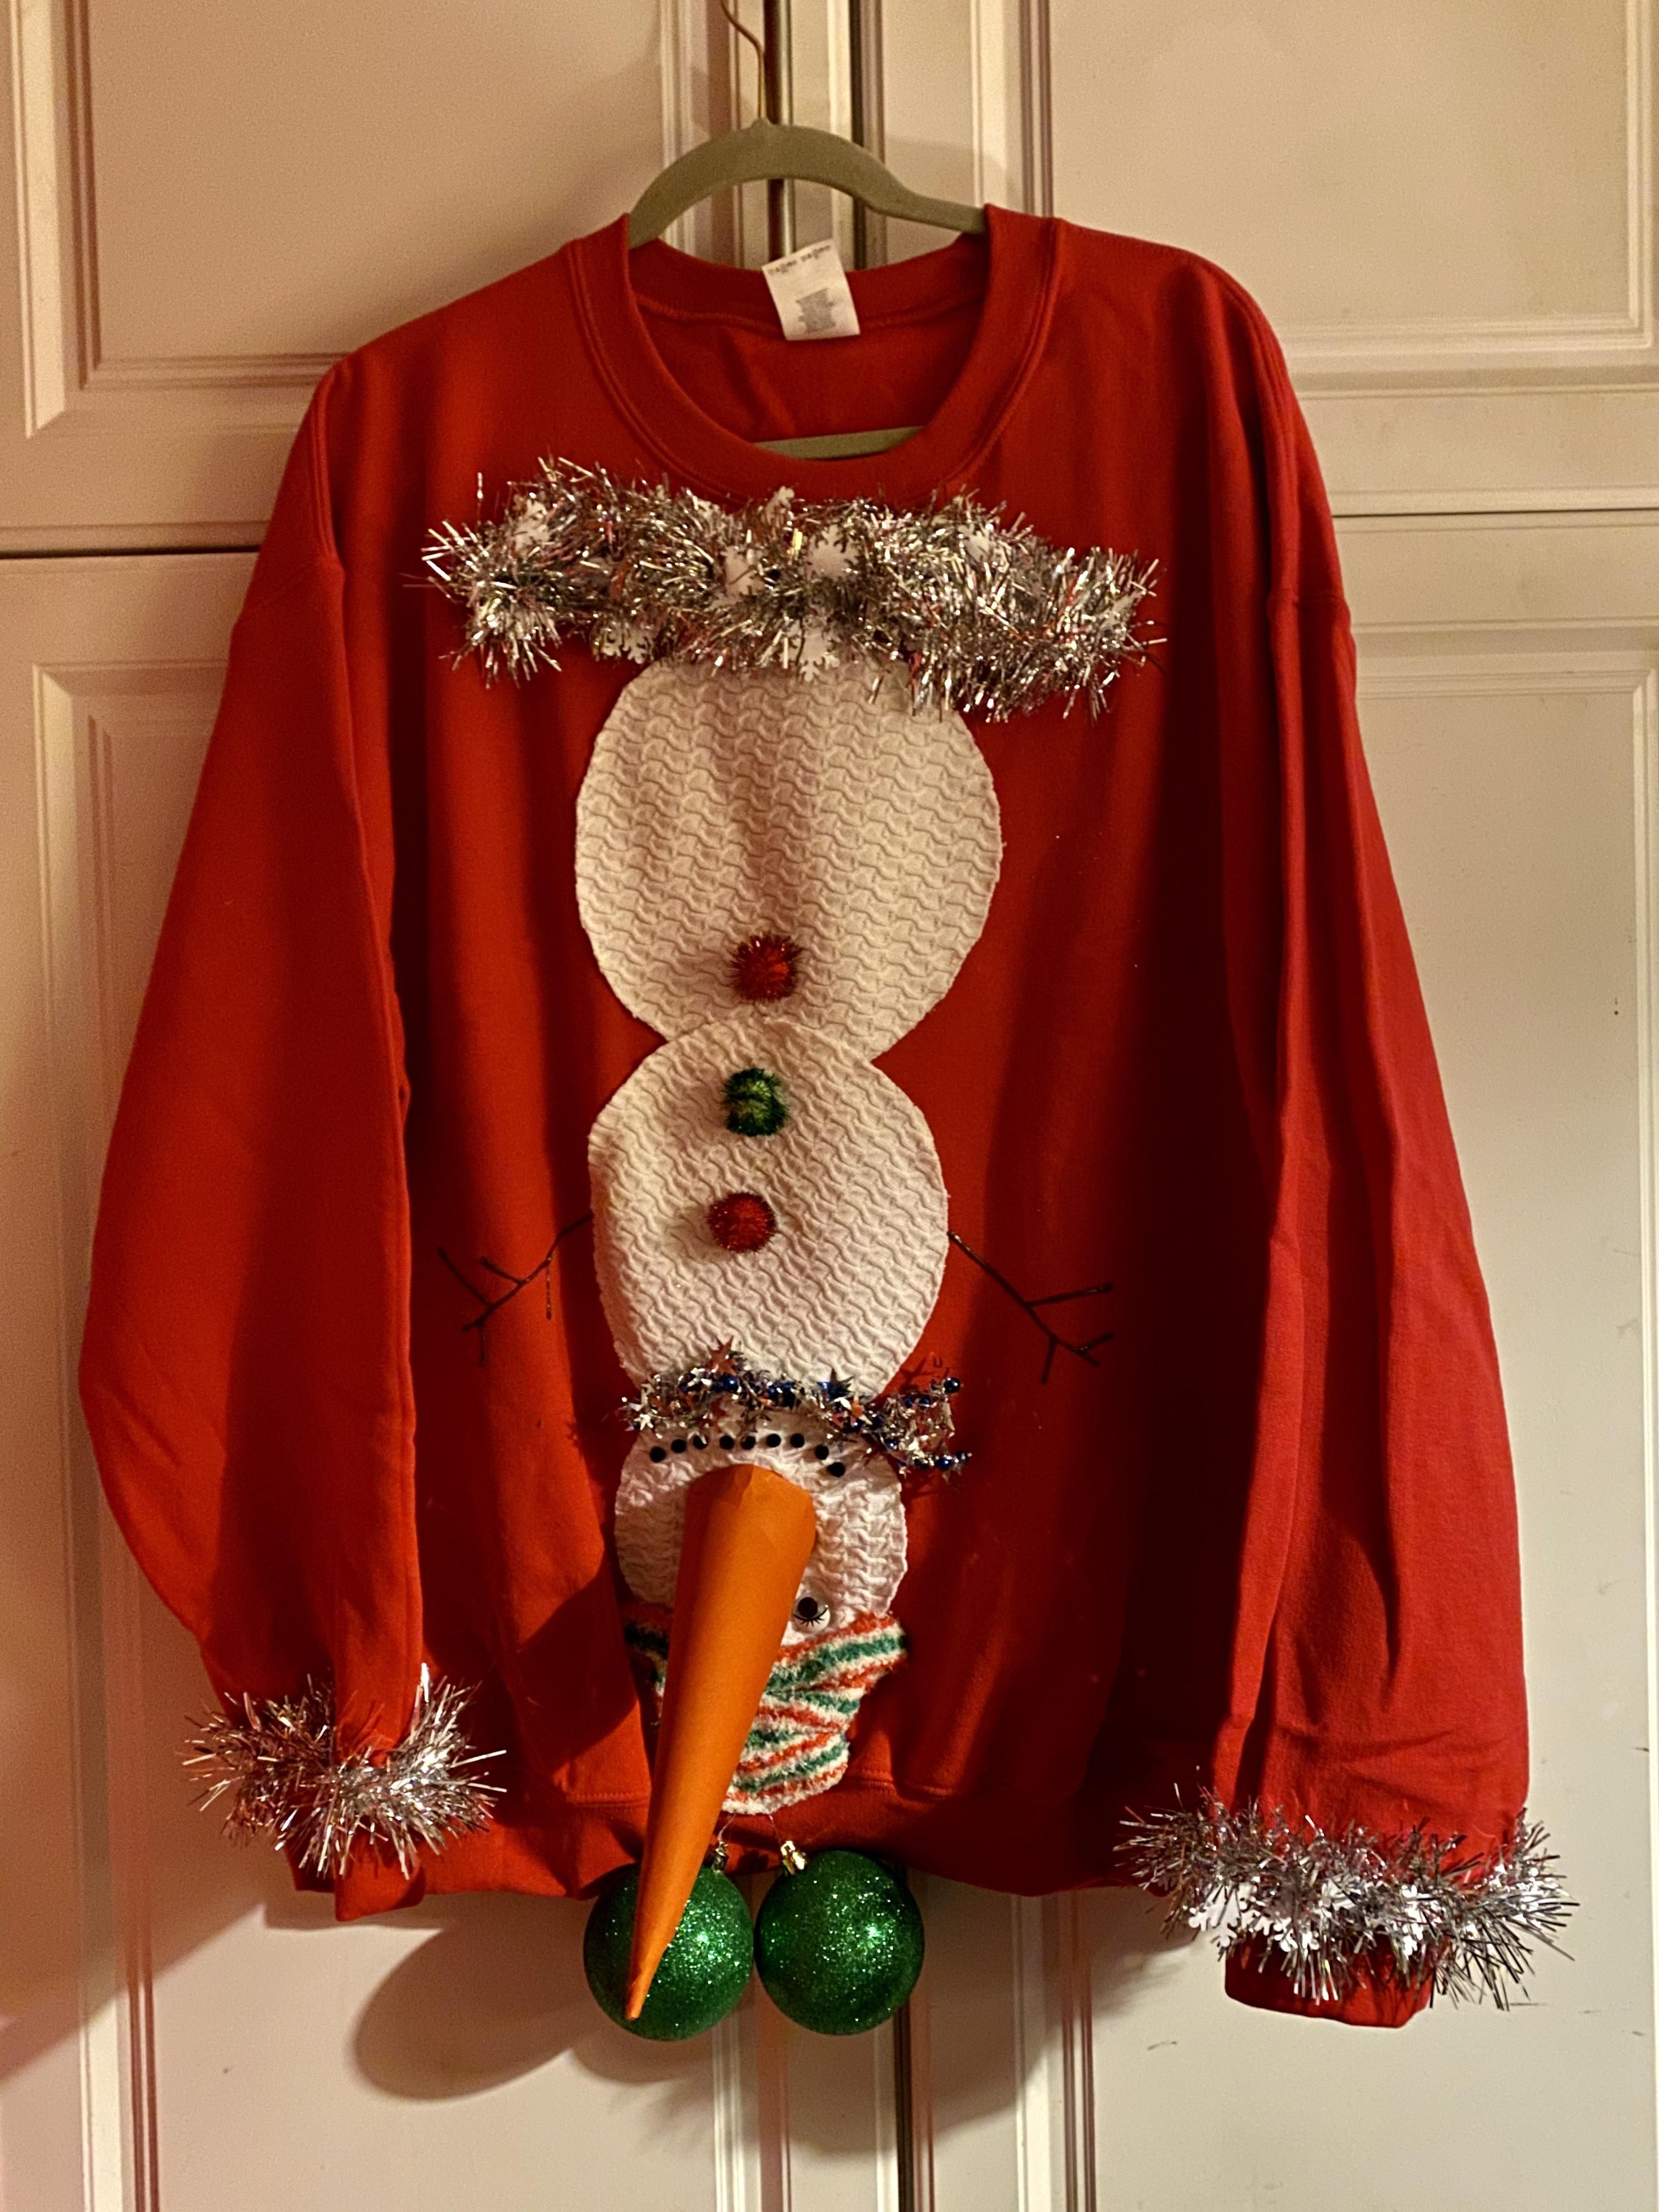 My bonus son needed an “Ugly Xmas Sweater” for a party tonight. Fingers crossed he likes it .